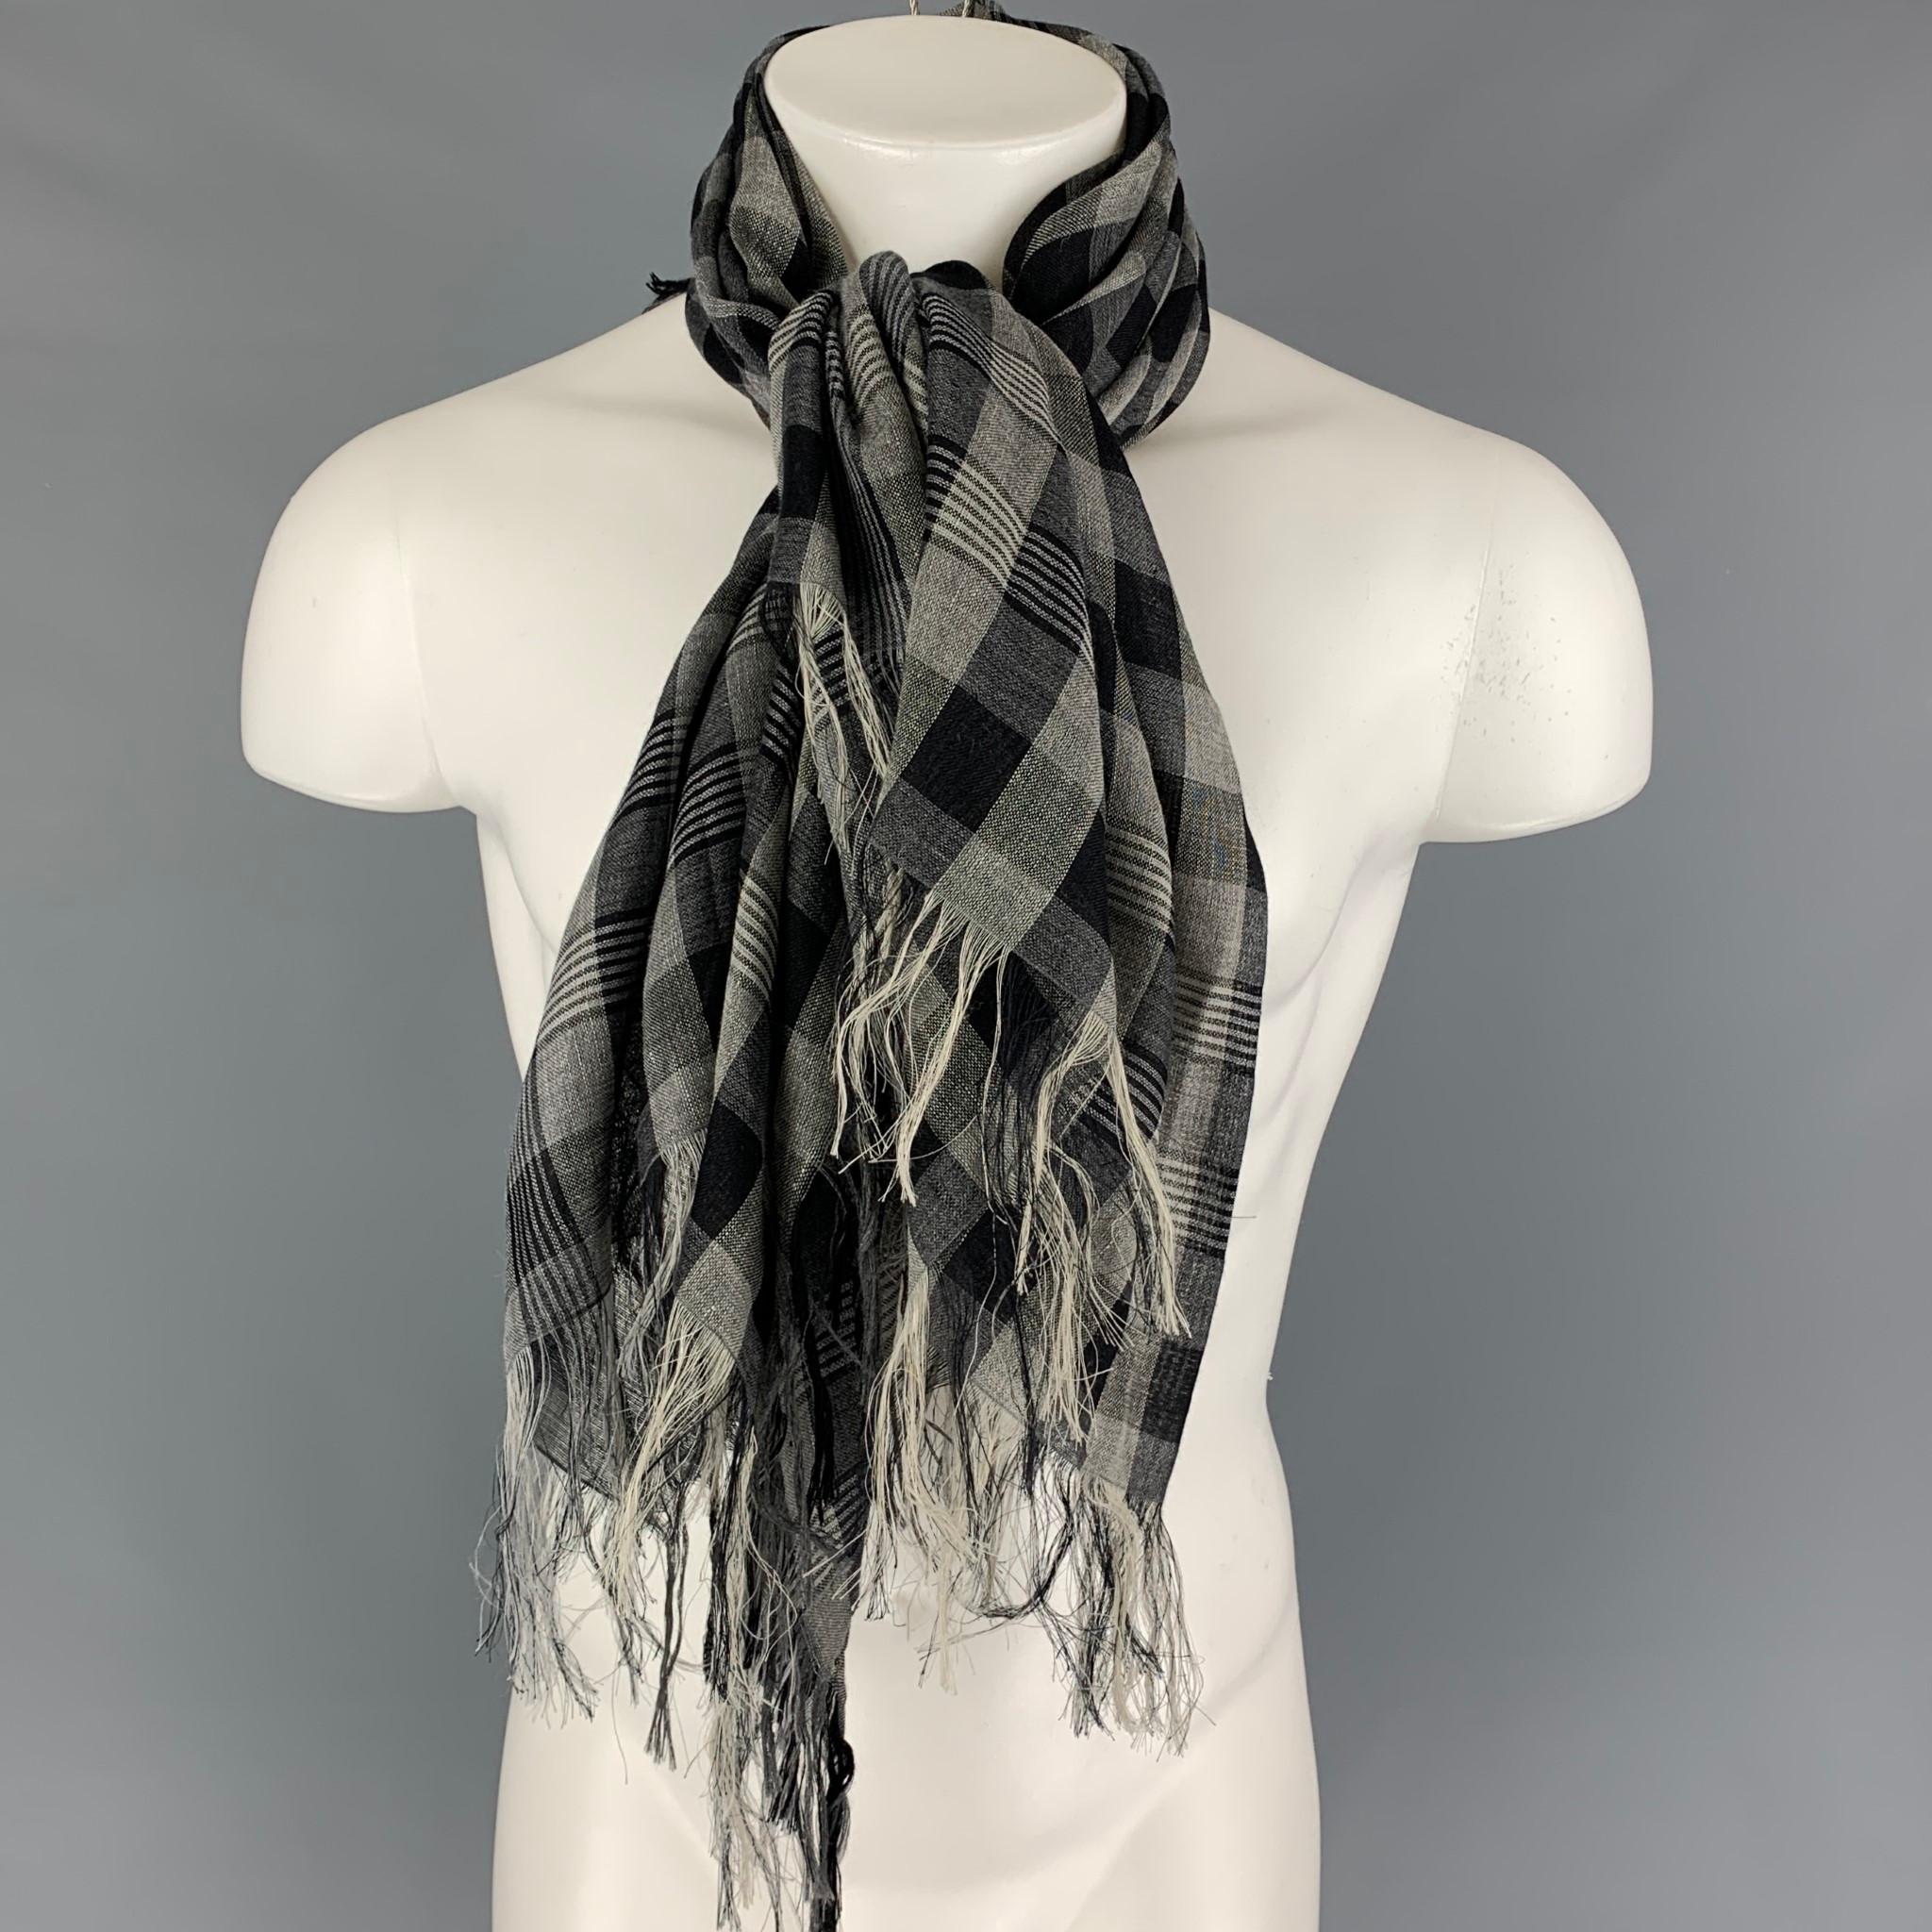 KRIS VAN ASSCHE scarf comes in a grey & black checkered cashmere / line featuring a fringe trim. Made in Italy. 

Very Good Pre-Owned Condition.

Measurements: 50 in. x 50 in.